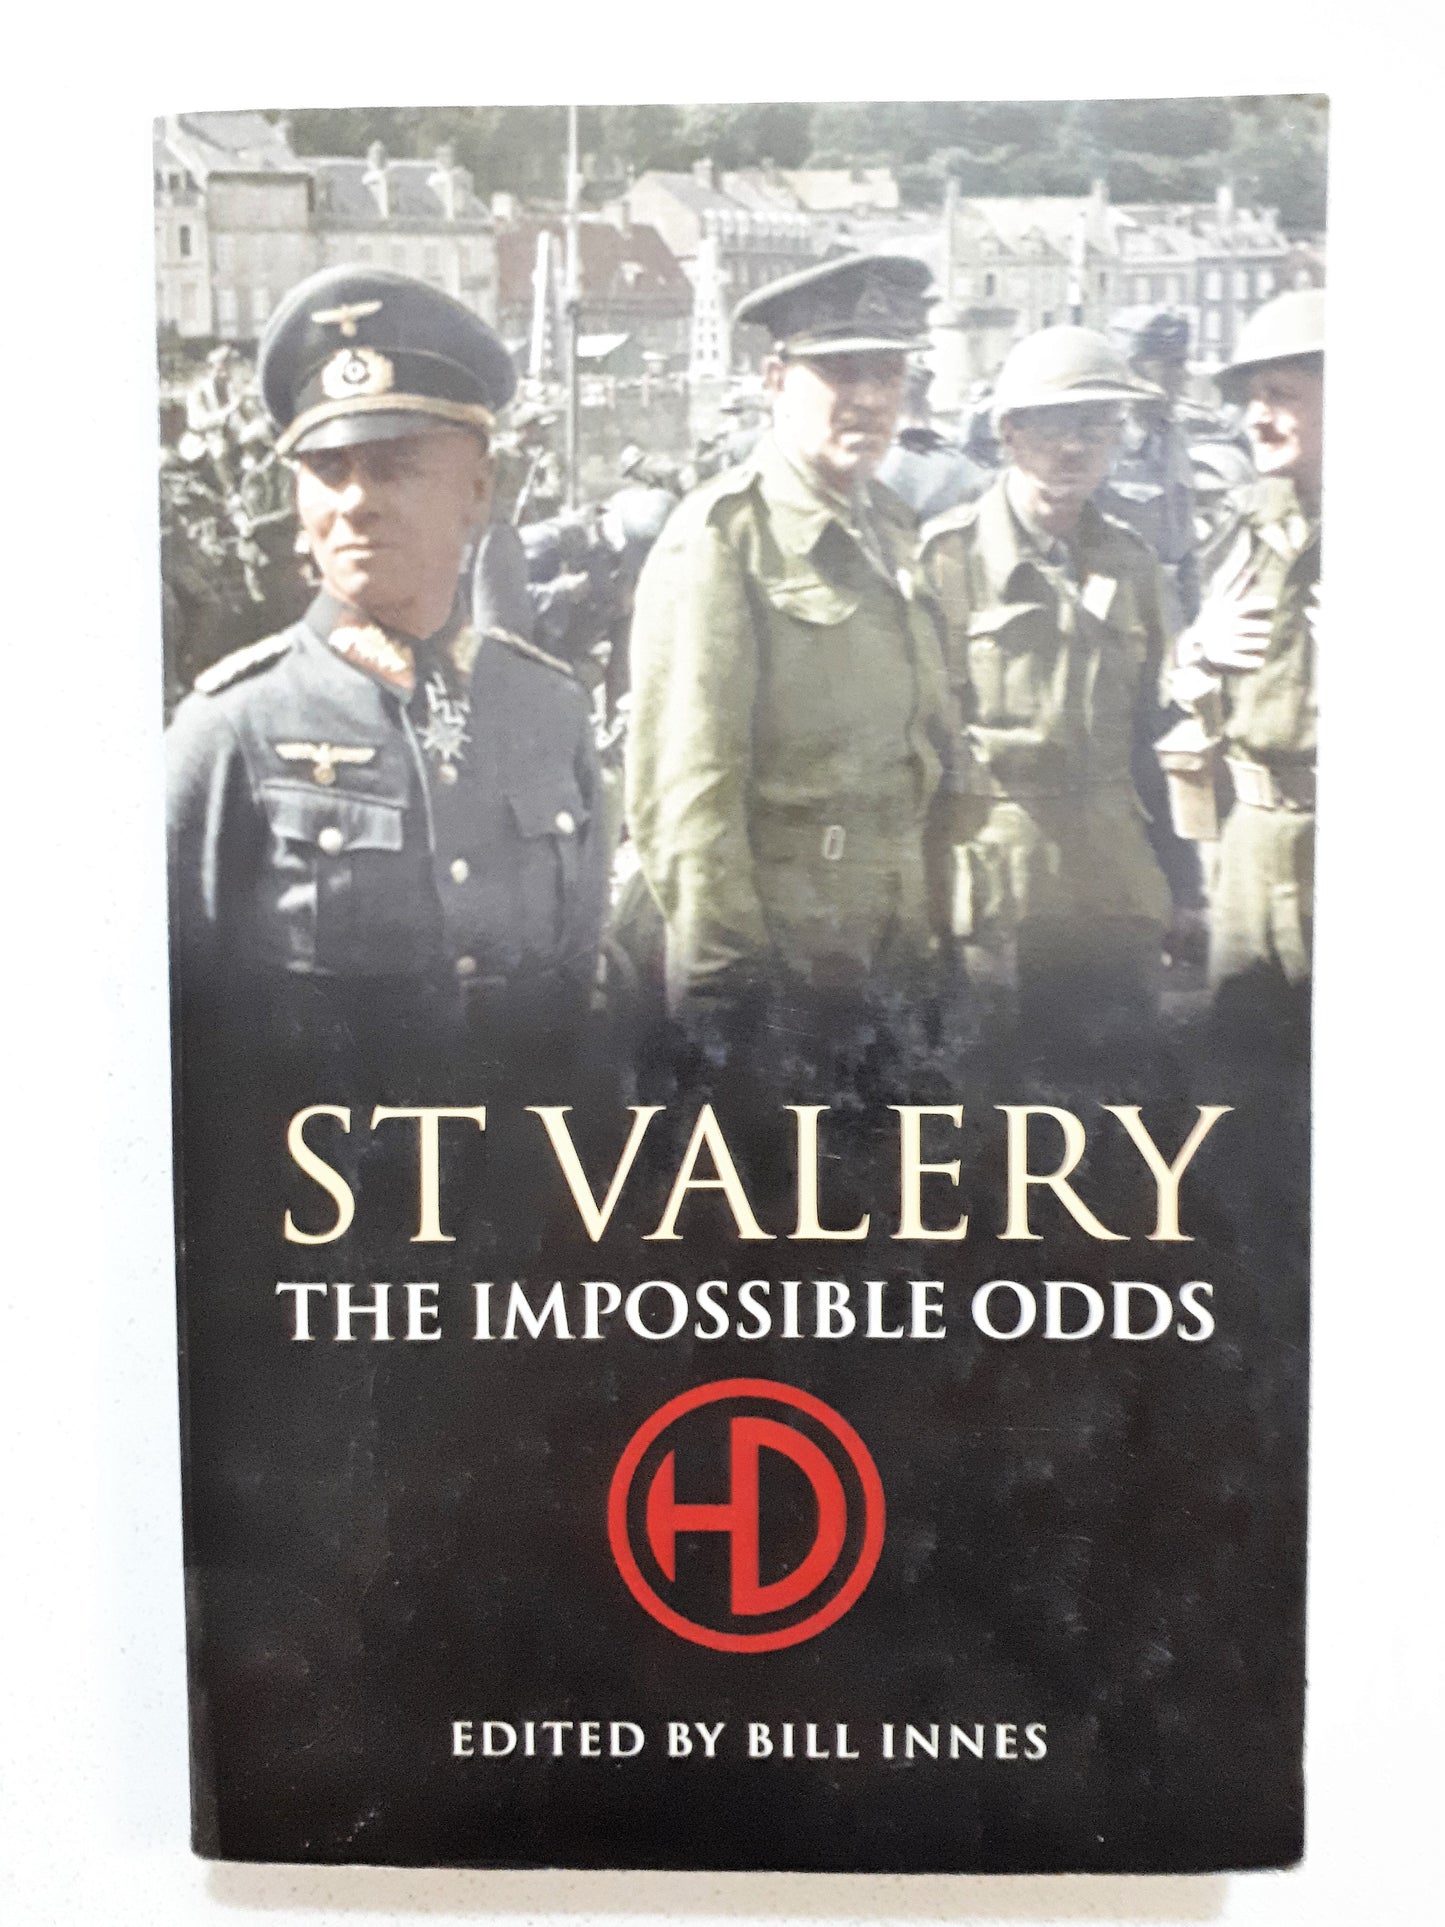 St Valery The Impossible Odds edited by Bill Innes